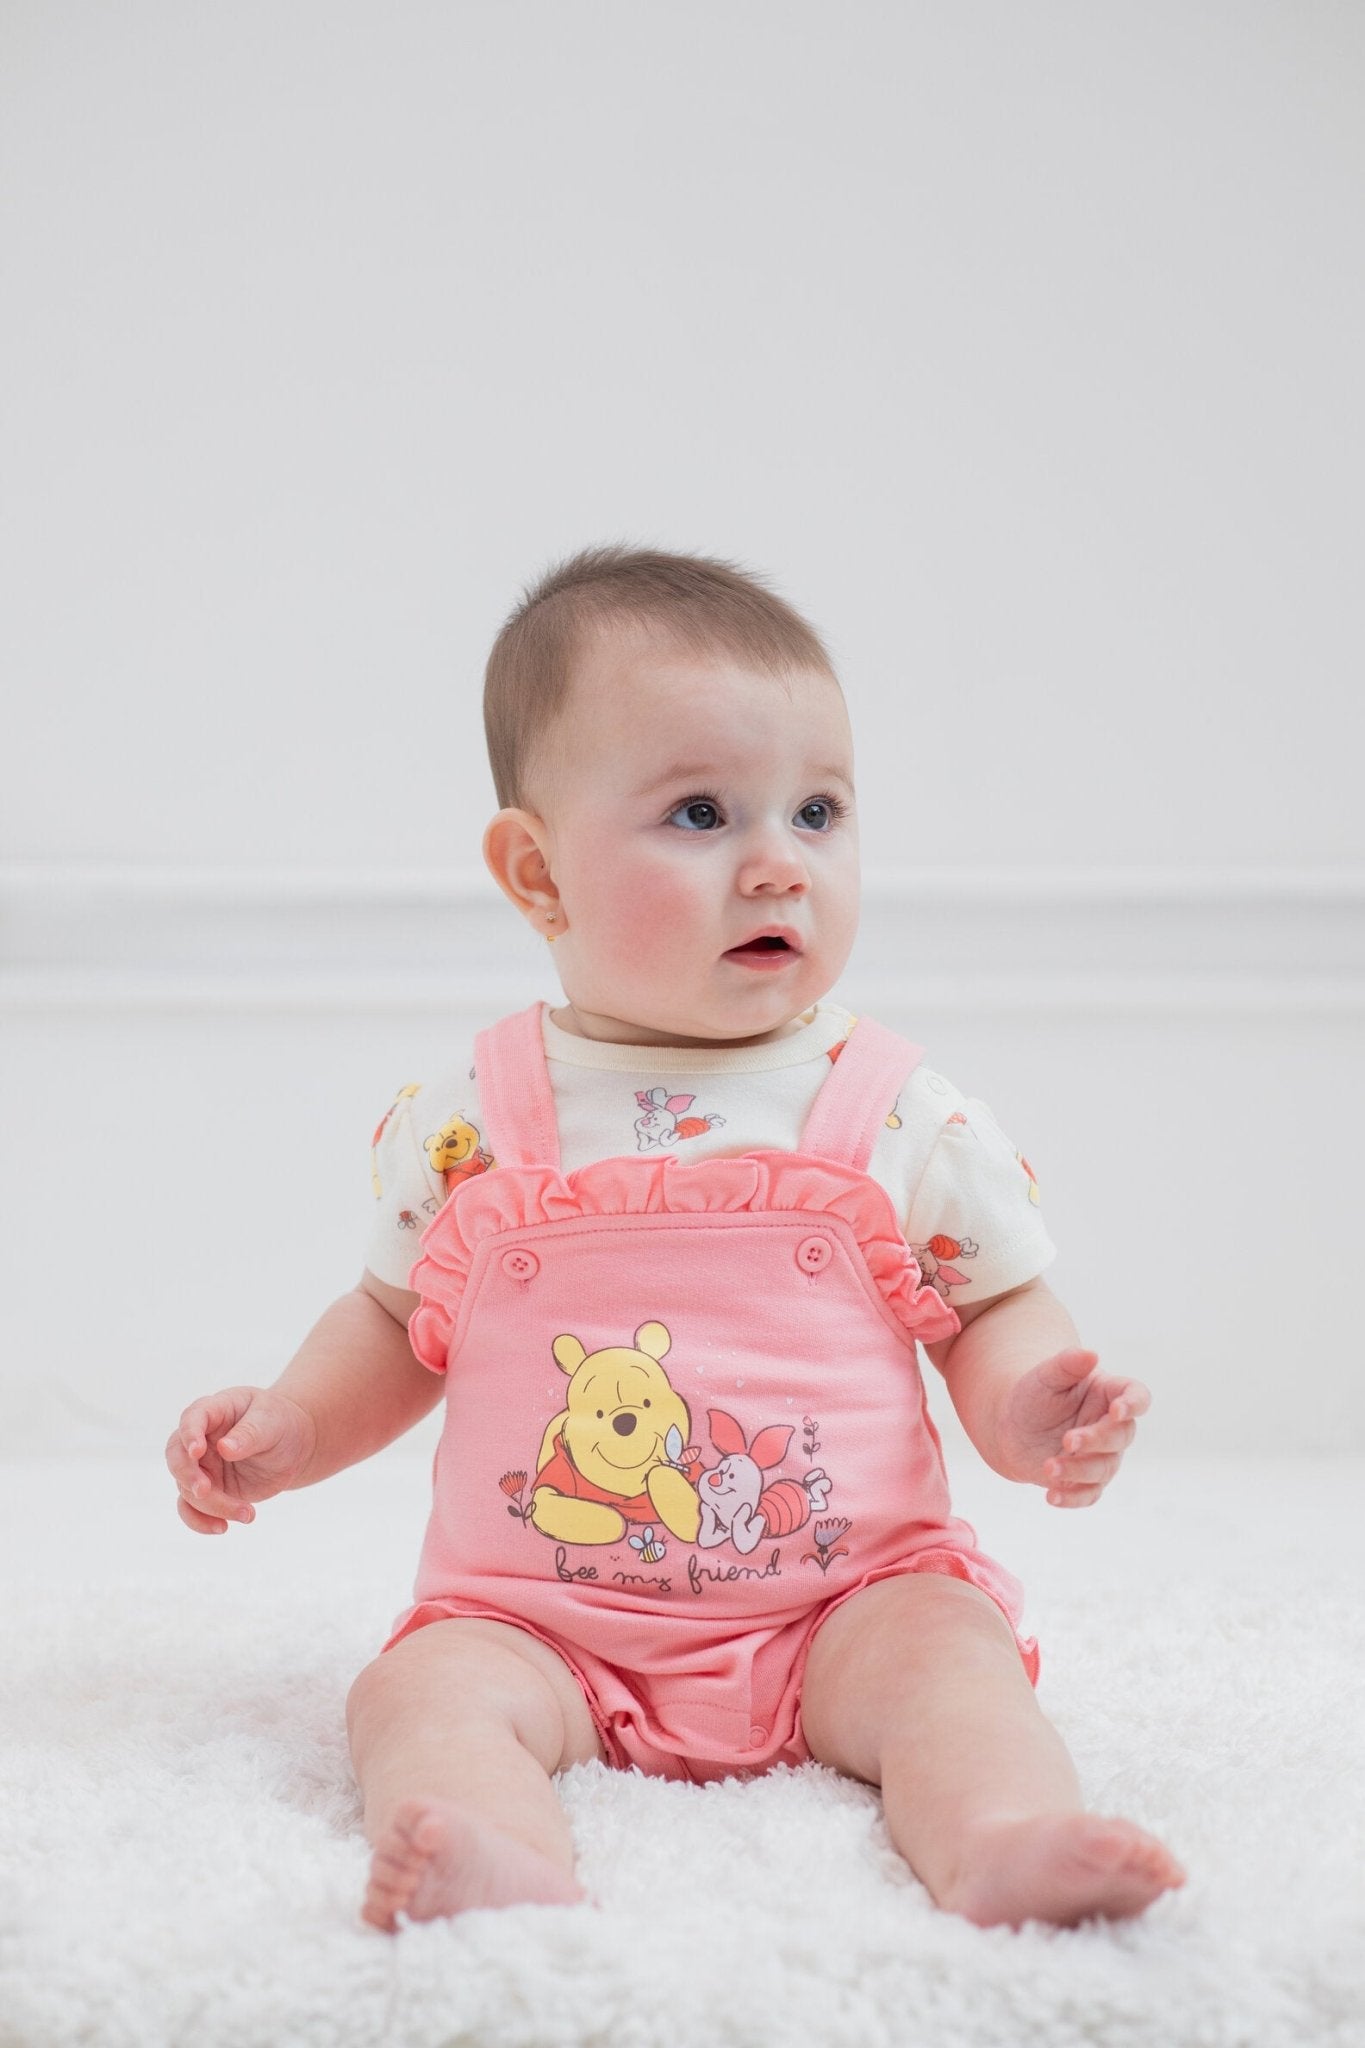 Disney Winnie the Pooh French Terry Short Overalls and T-Shirt - imagikids